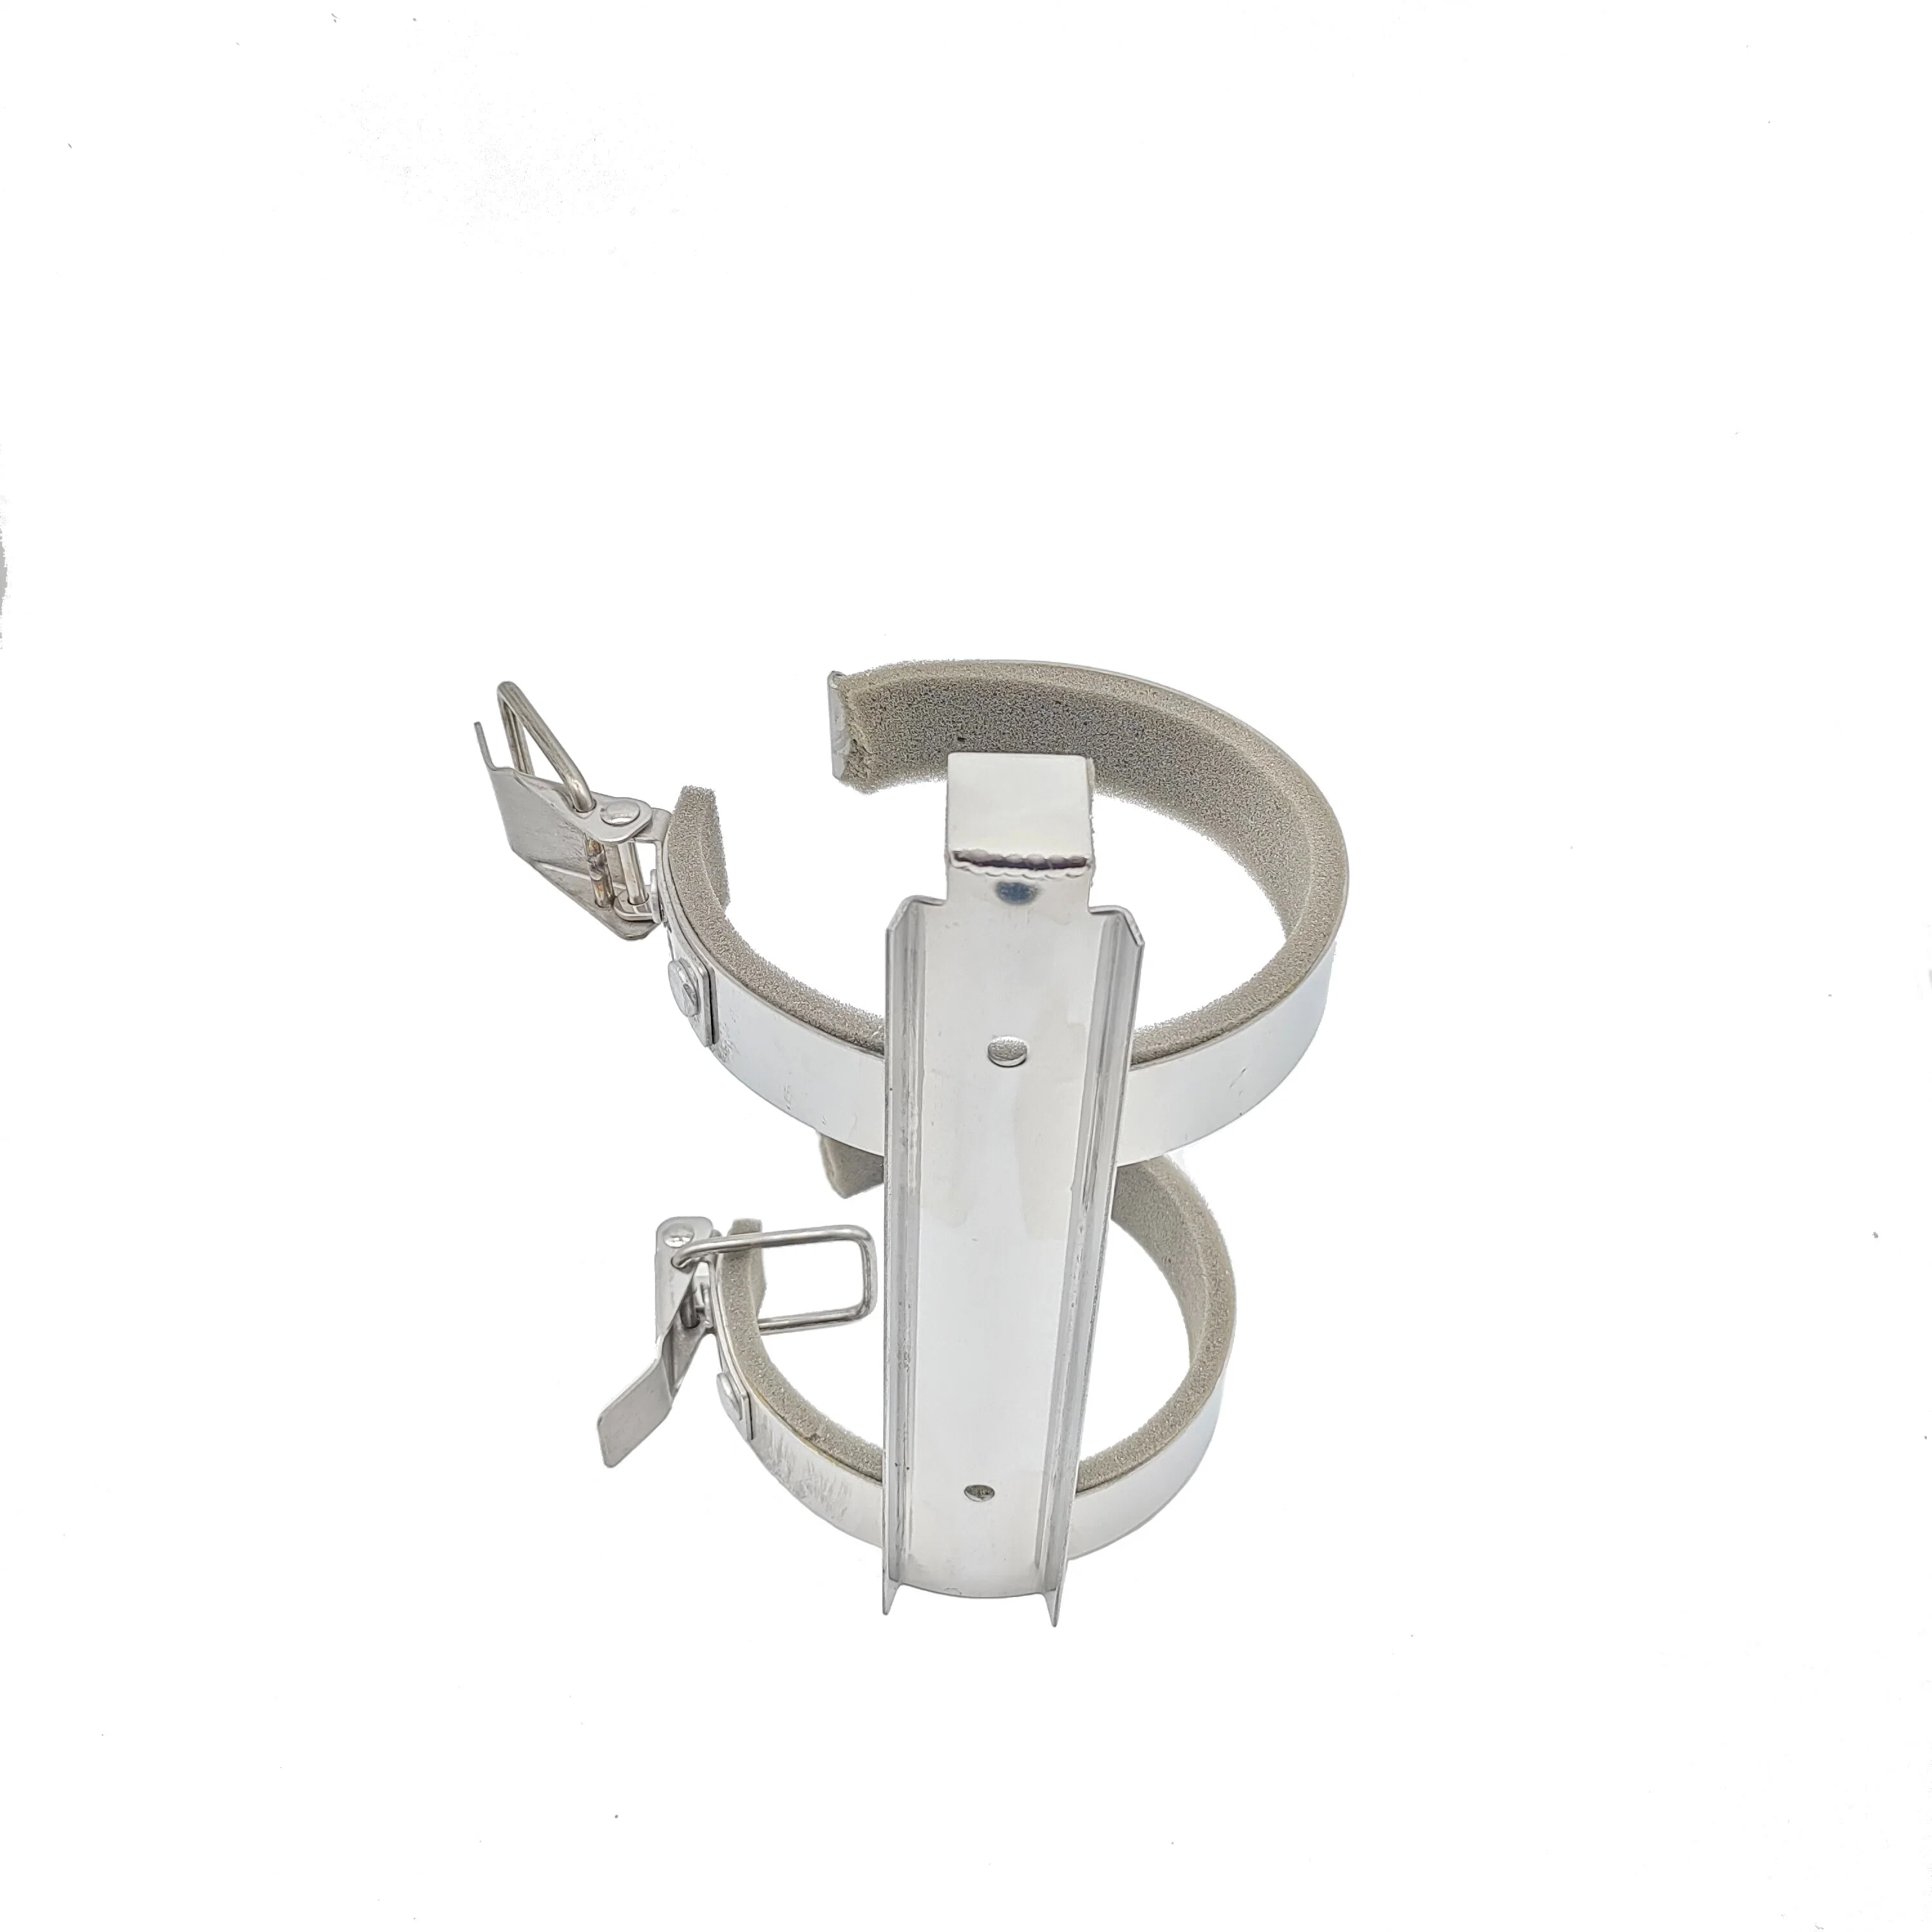 Professional Fire Extinguisher Bracket - Rust-Proof and Wear-Resistant Metal Holder